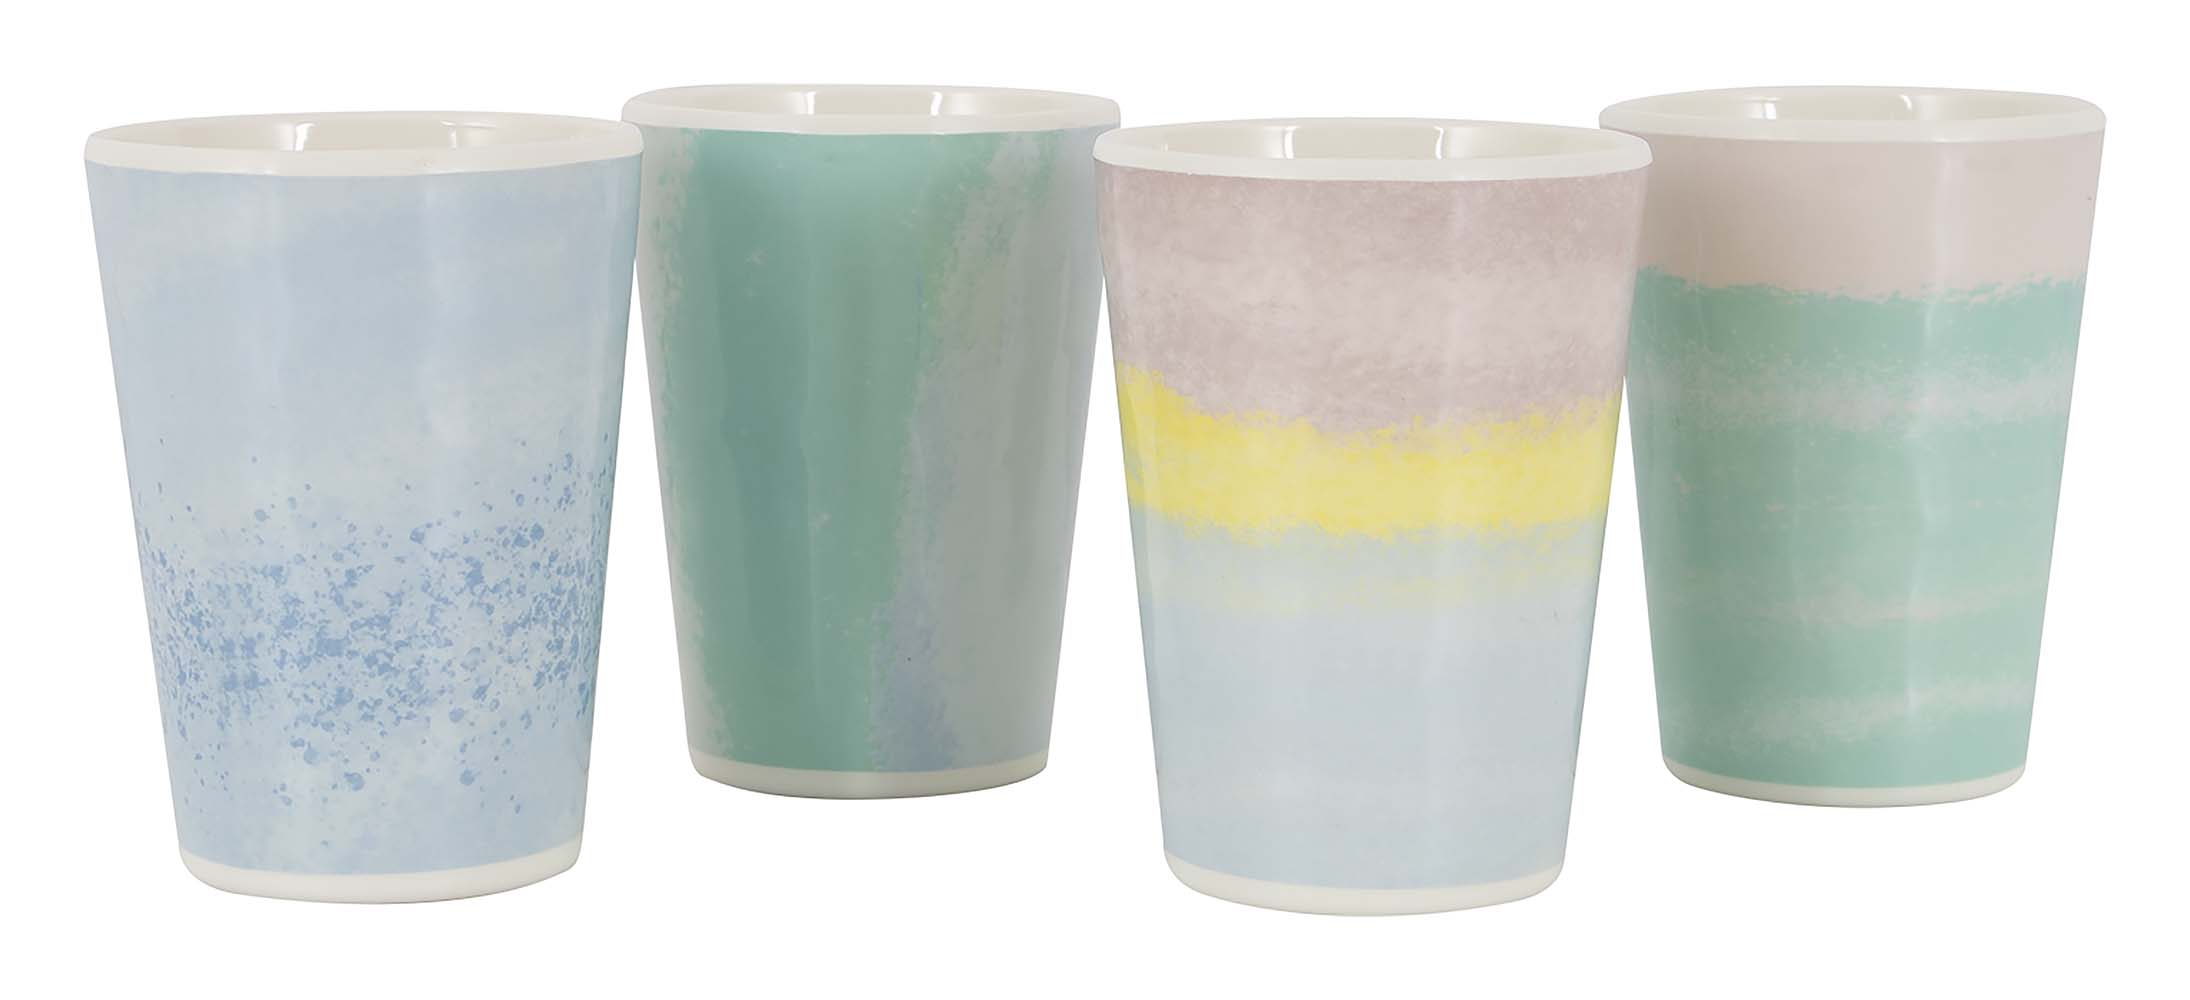 6181372 A set of cheerful cups from the pastel collection. This high quality melamine cup is made of 100% melamine virtually unbreakable and very lightweight. The cup is also scratch resistant and dishwasher safe. These cups are perfect to combine with the 12-piece tableware set Barfleur 6181371.